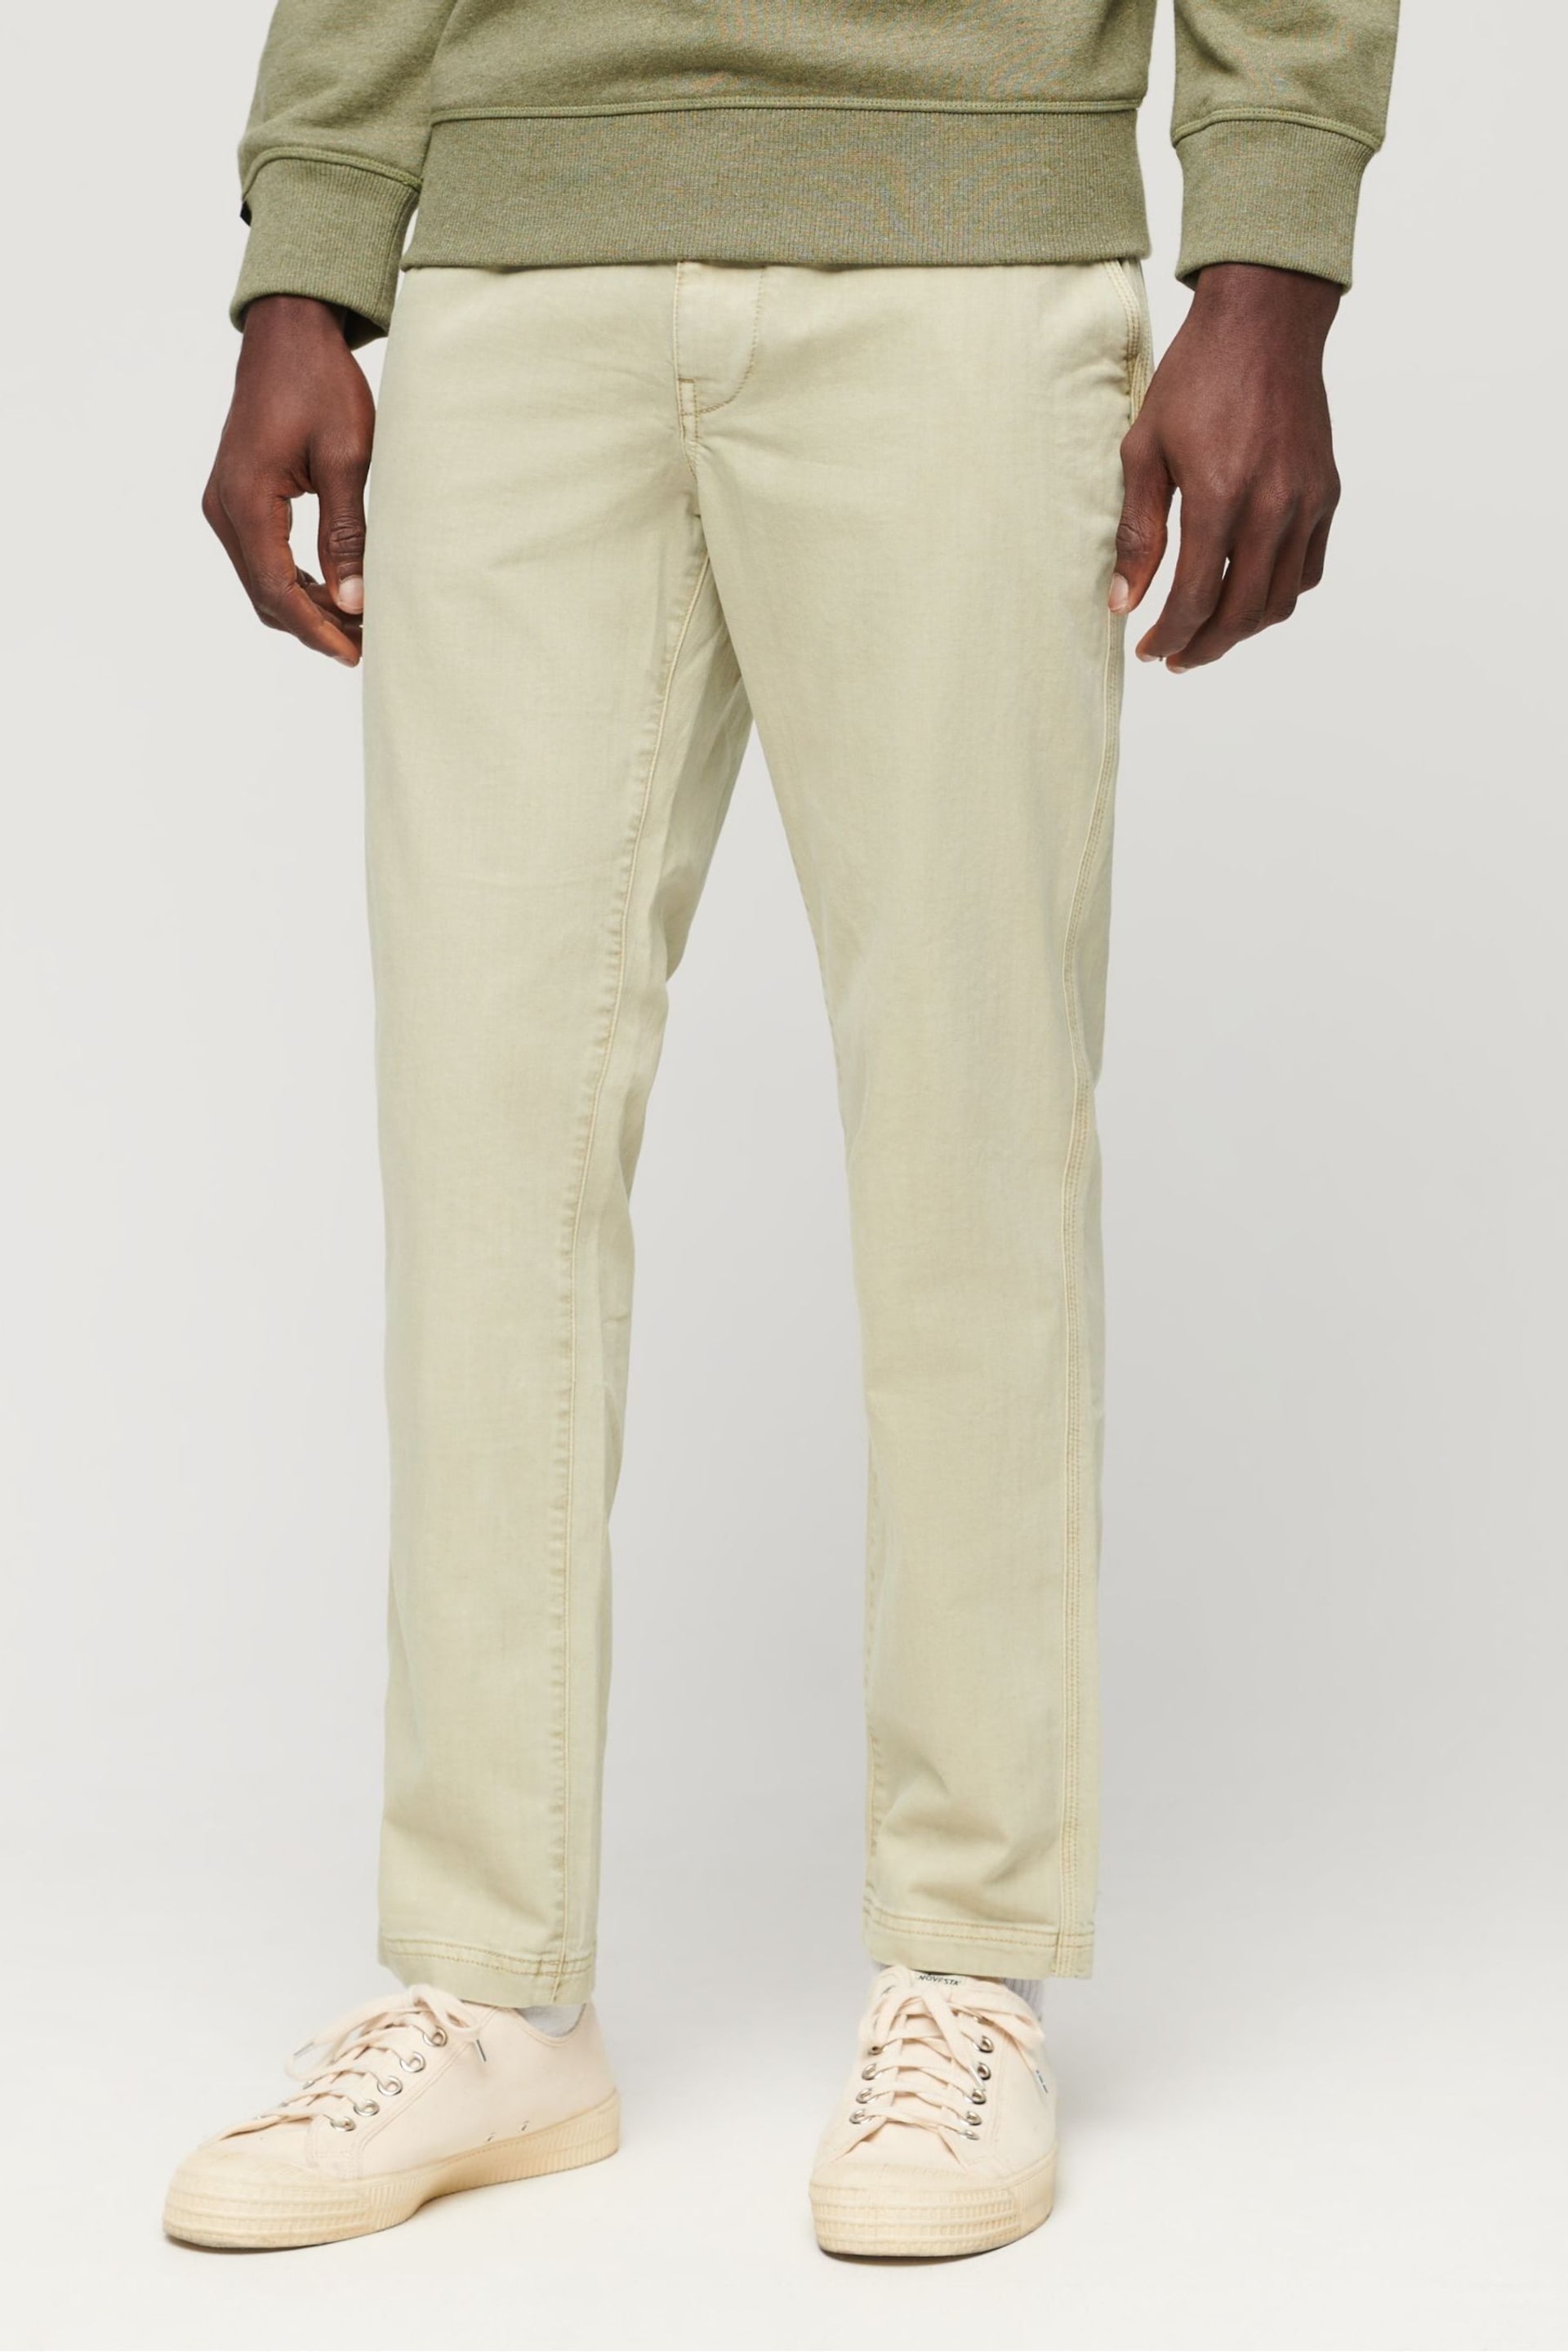 Superdry Natural International Chino Trousers - Image 3 of 8